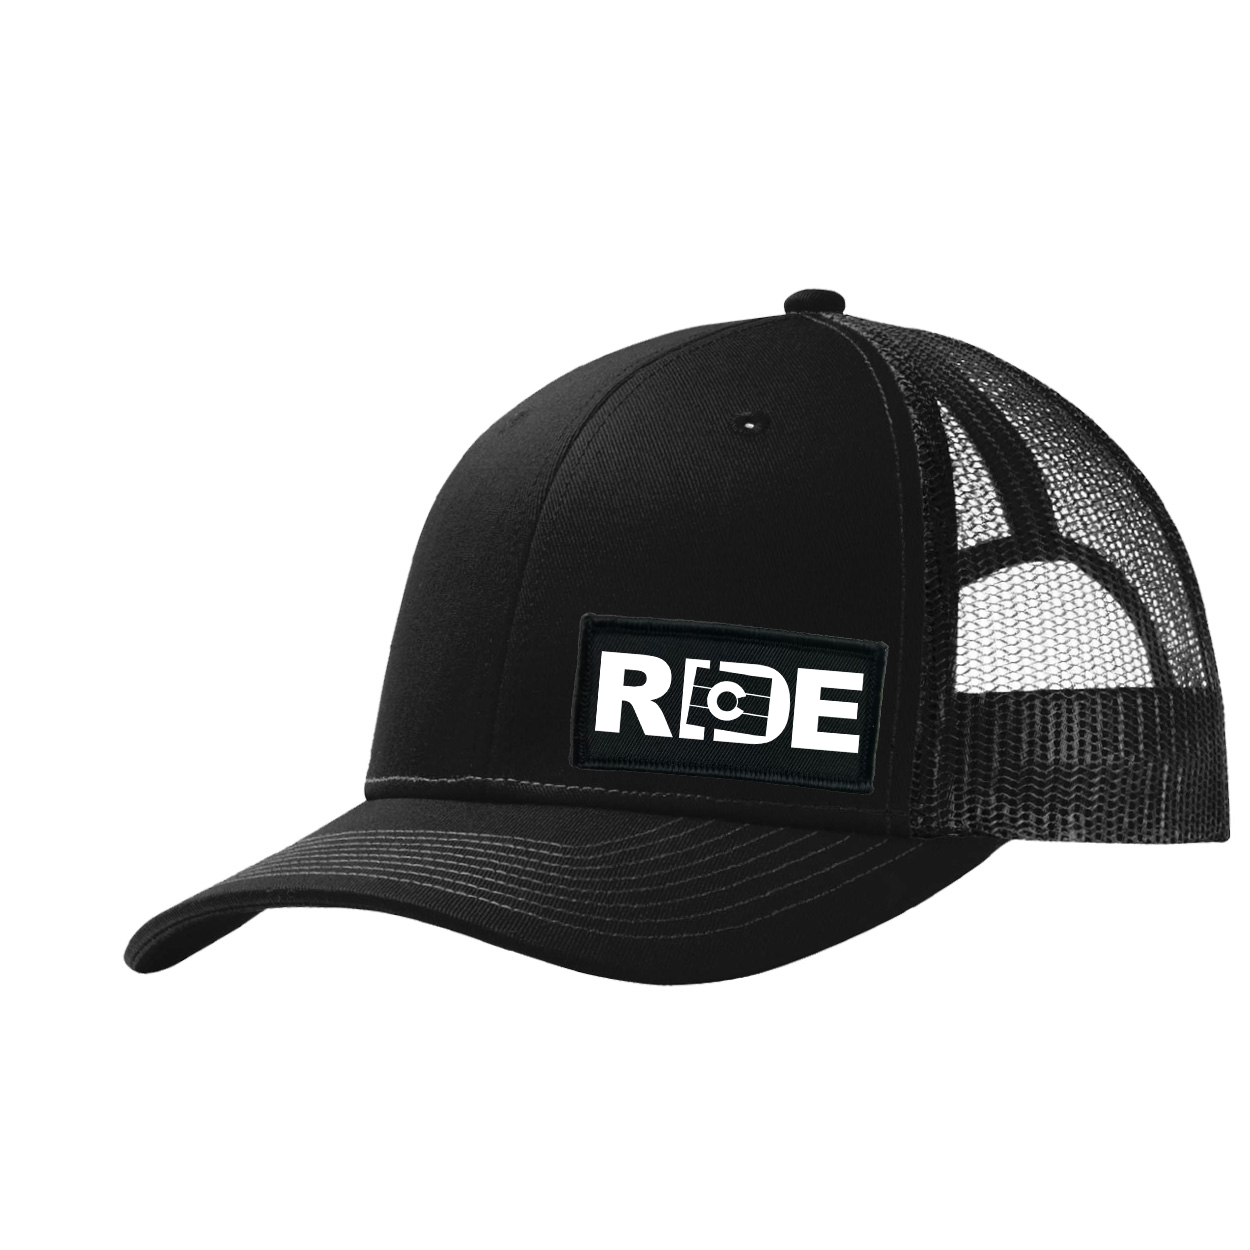 Ride Colorado Night Out Woven Patch Snapback Trucker Hat Black (White Logo)